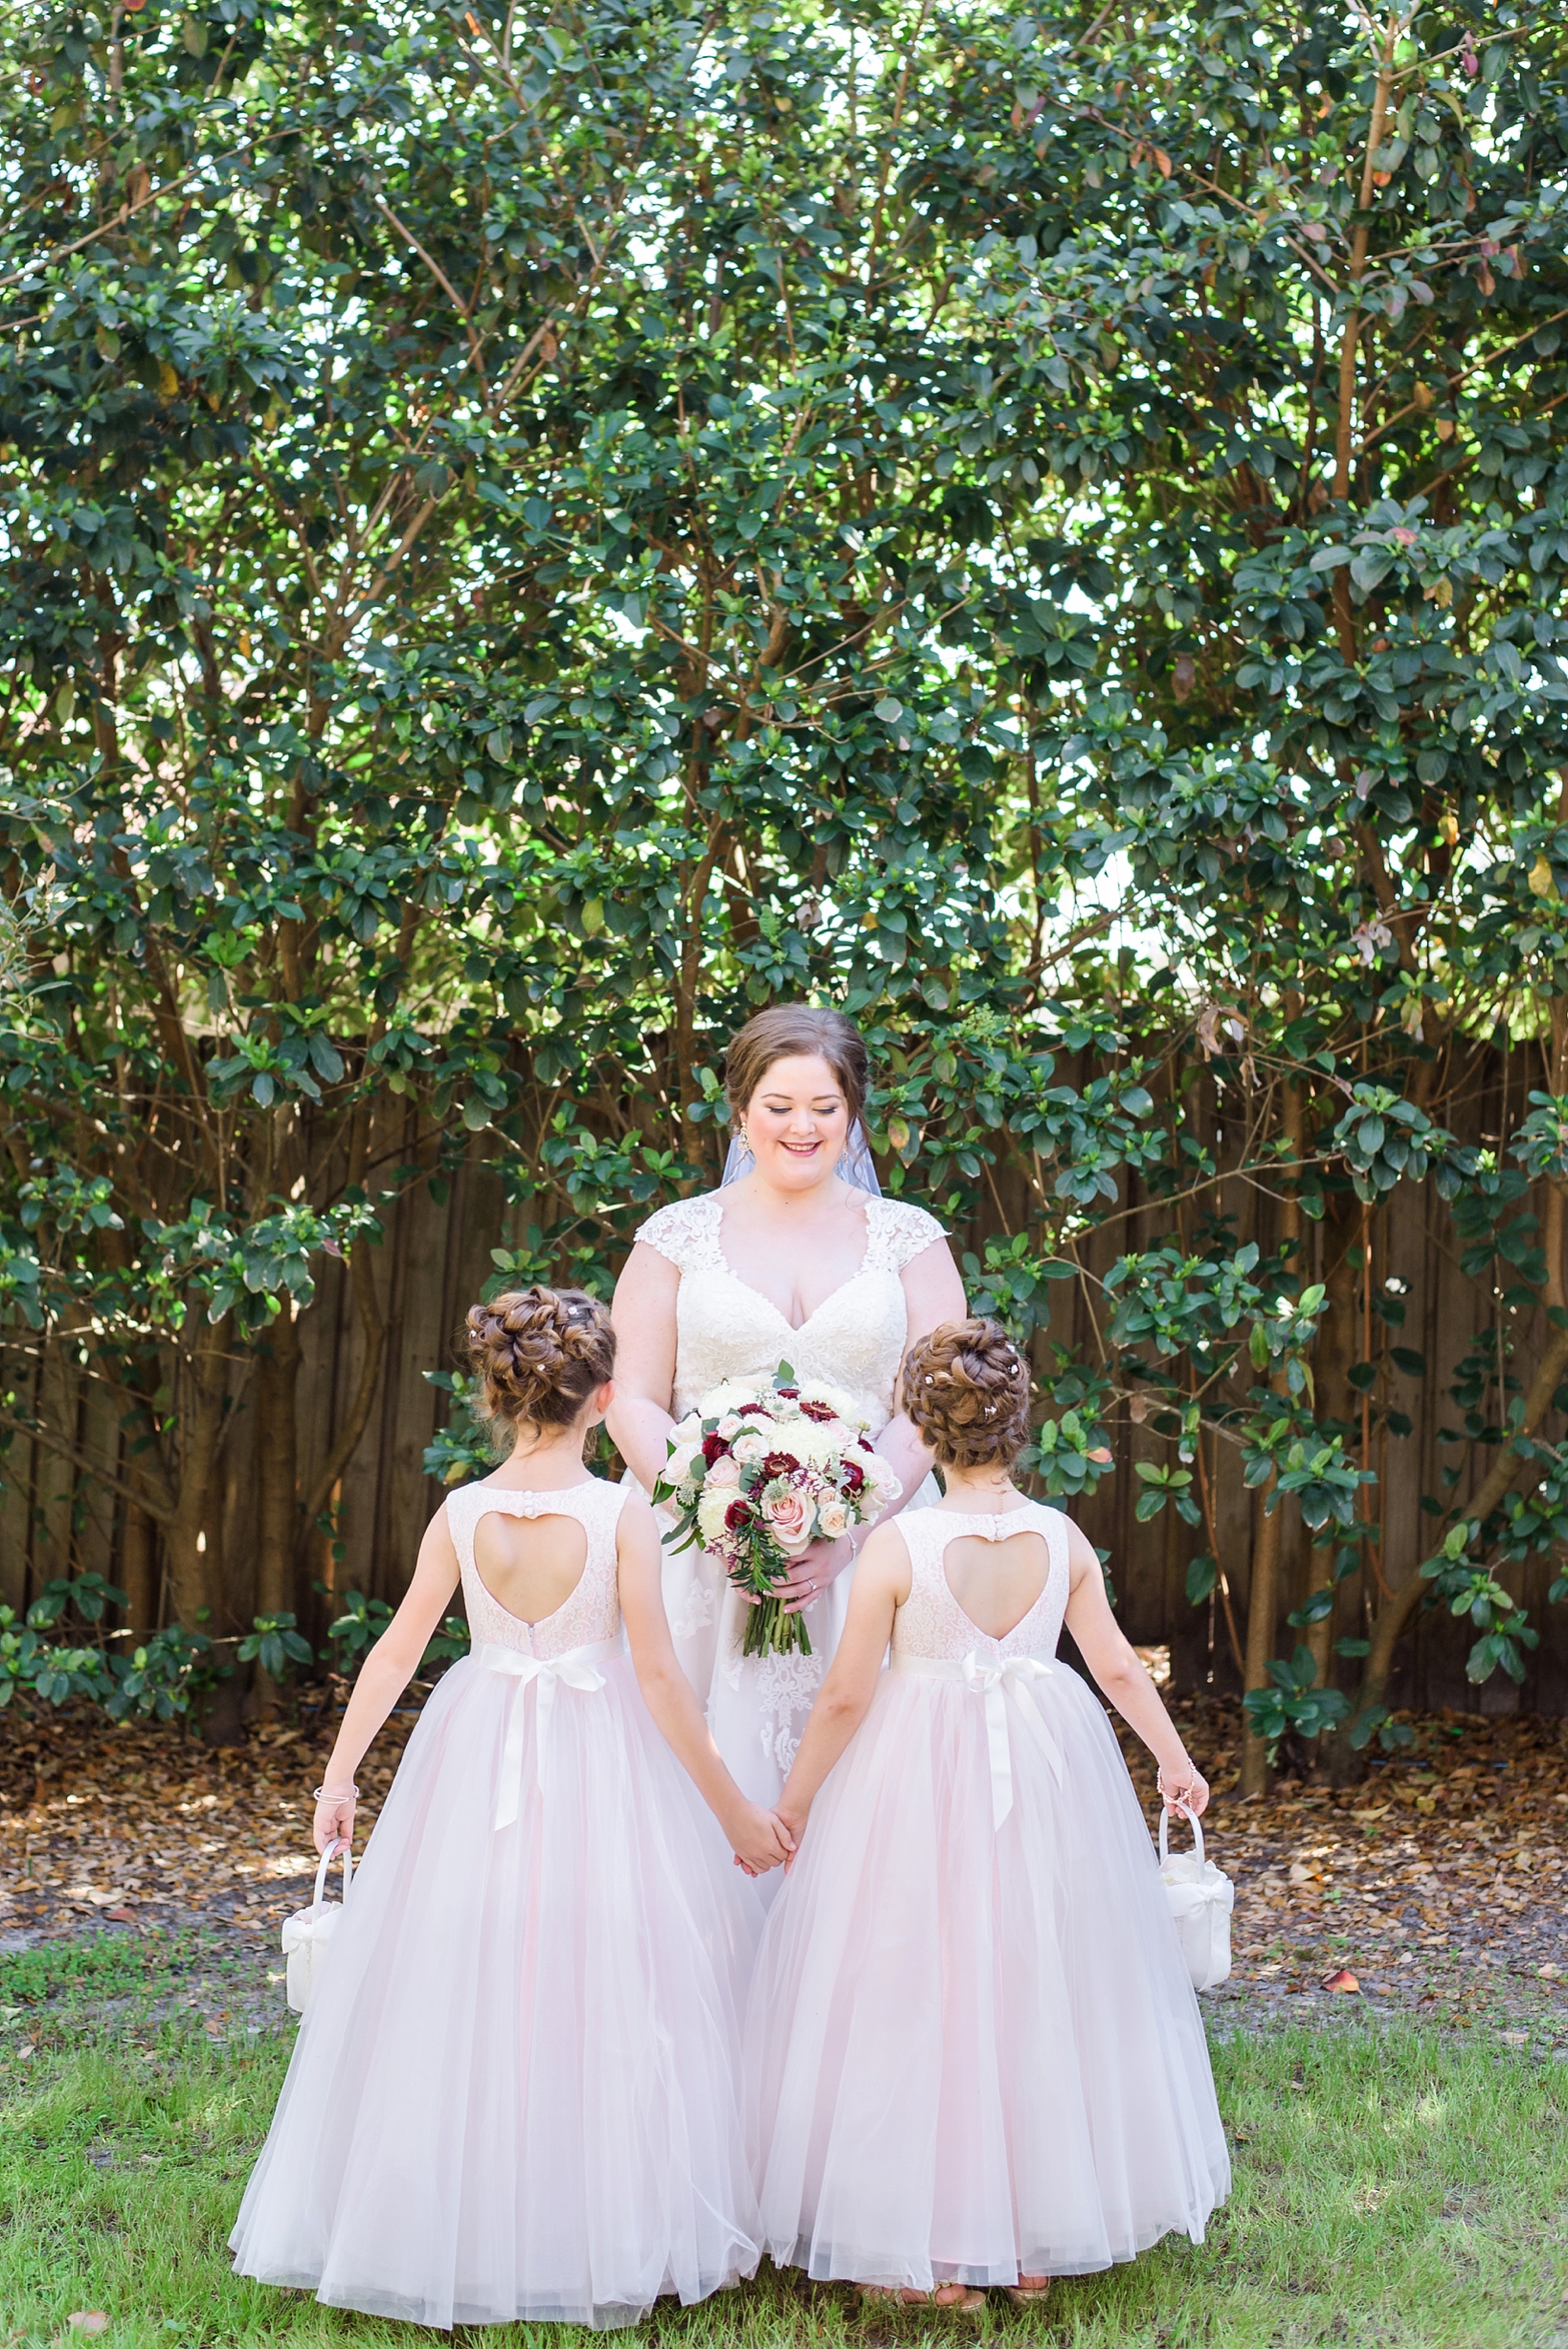 Bride and her flower girls in matching dresses with hearts in the back